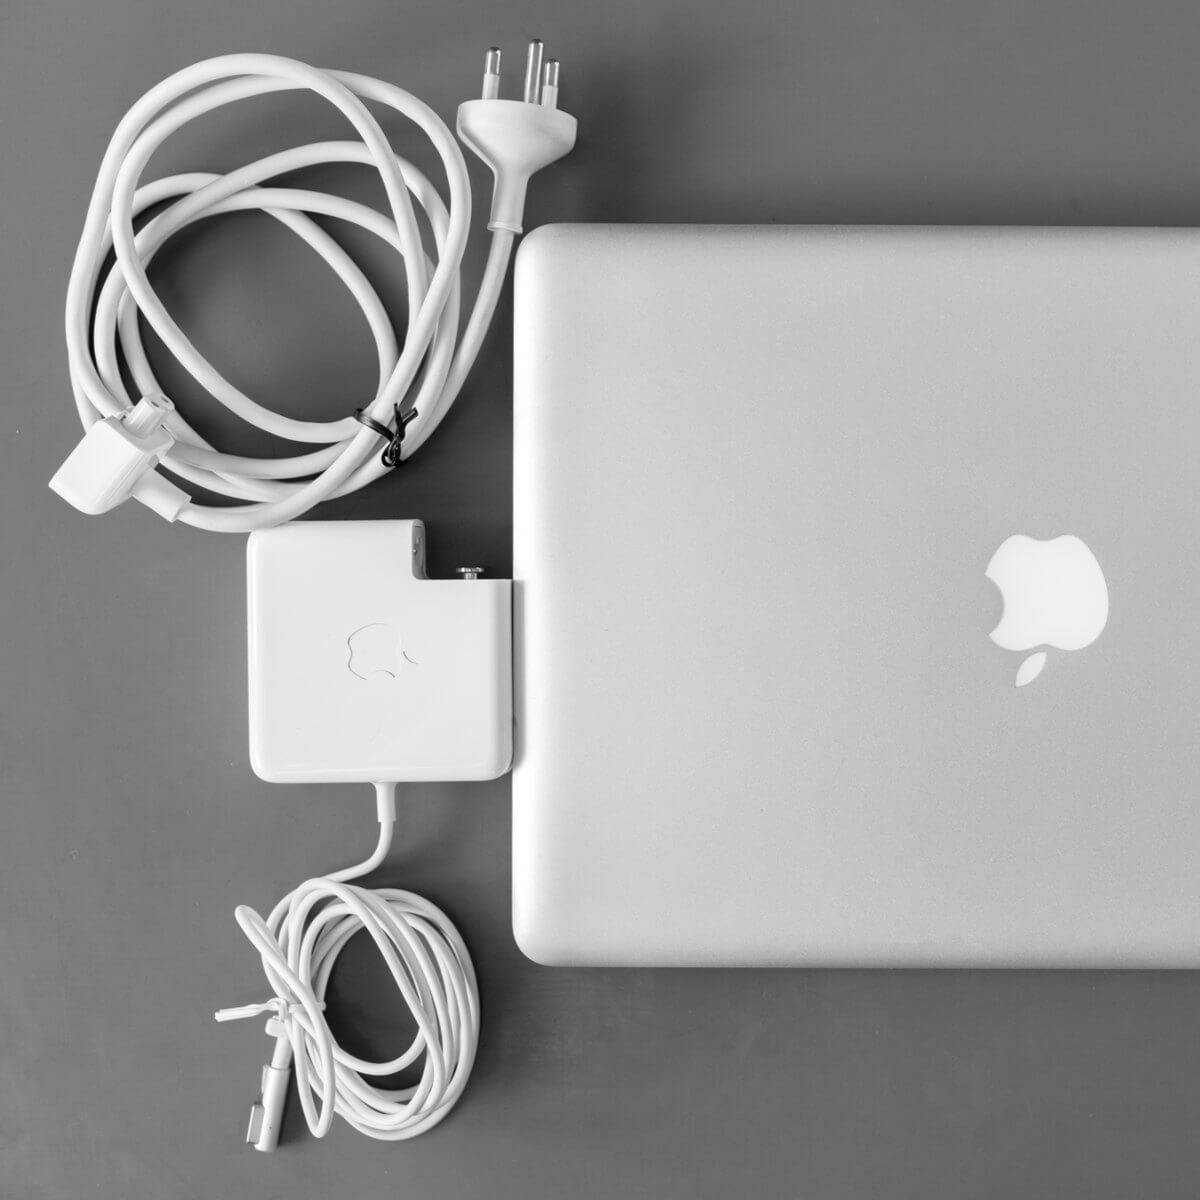 macbook connected but not charging